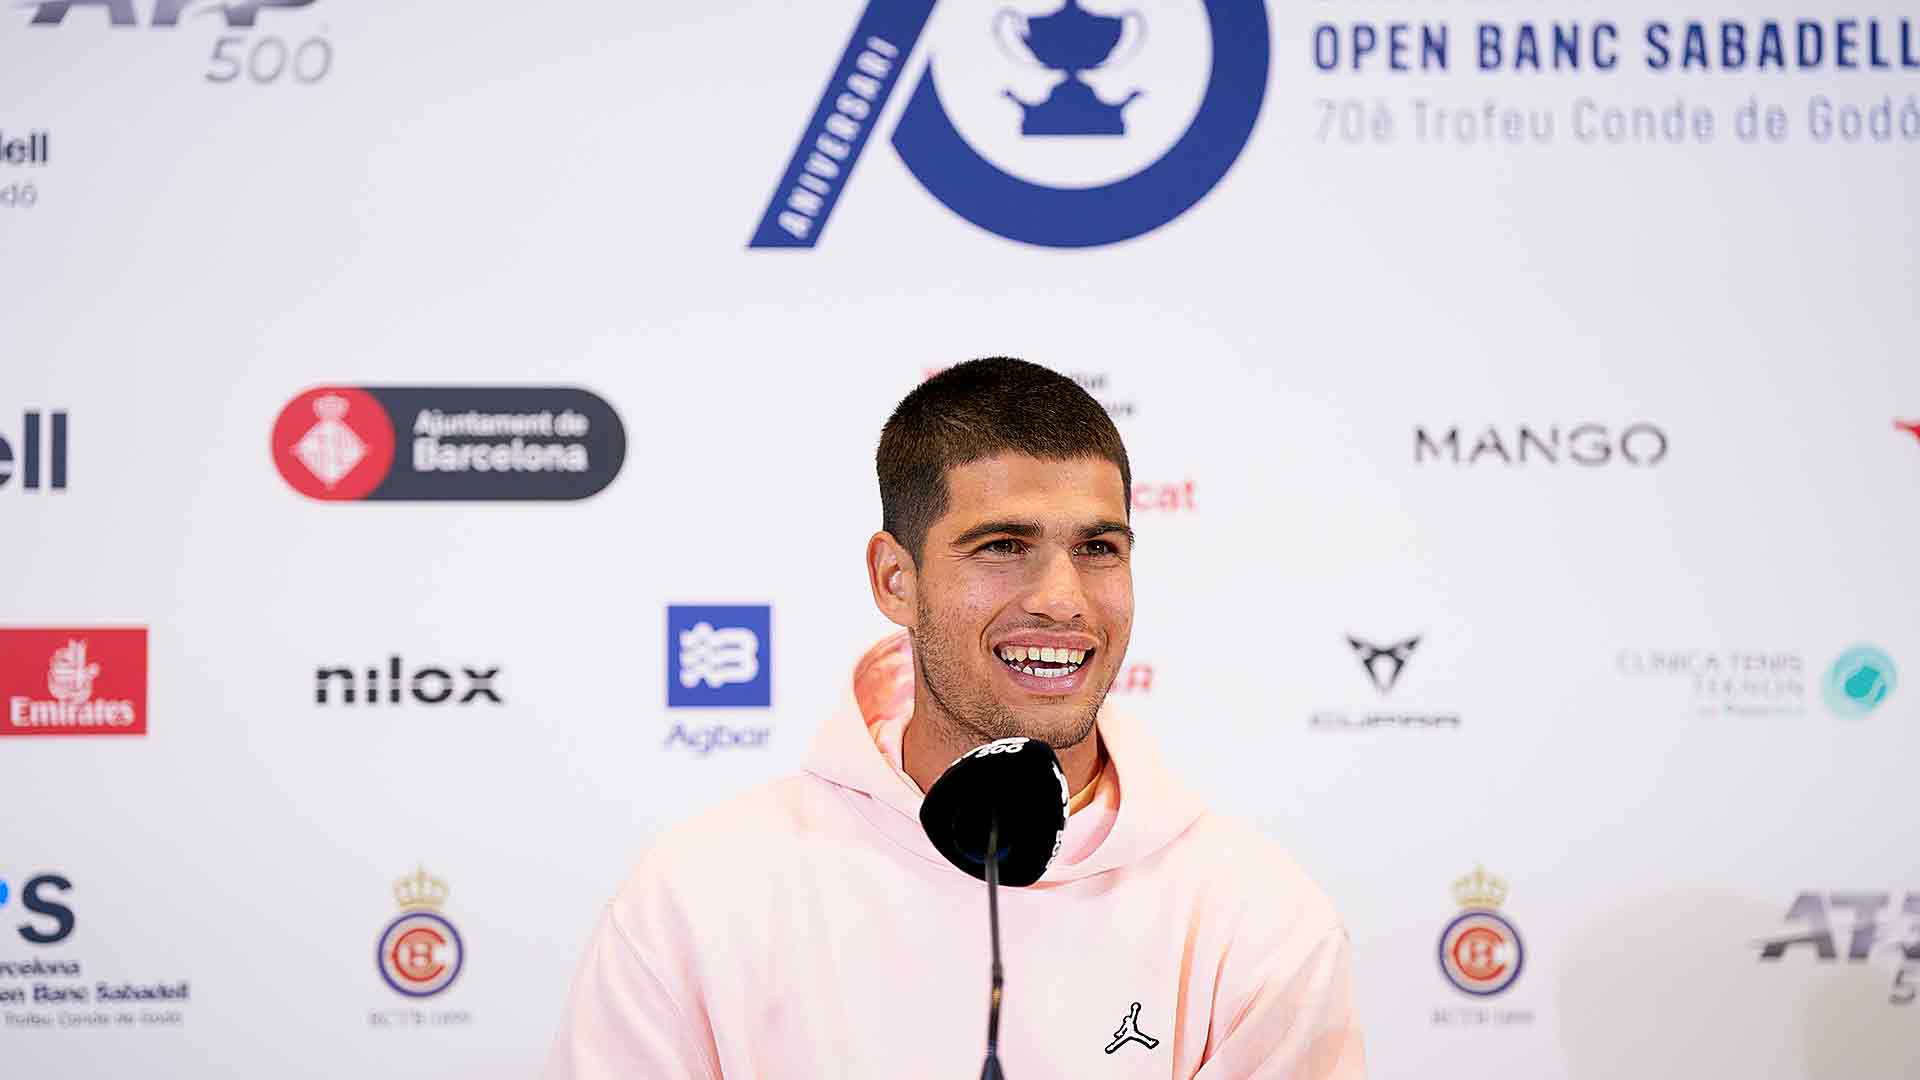 A relaxed Carlos Alcaraz is preparing to defend his crown at the ATP 500 in Barcelona.